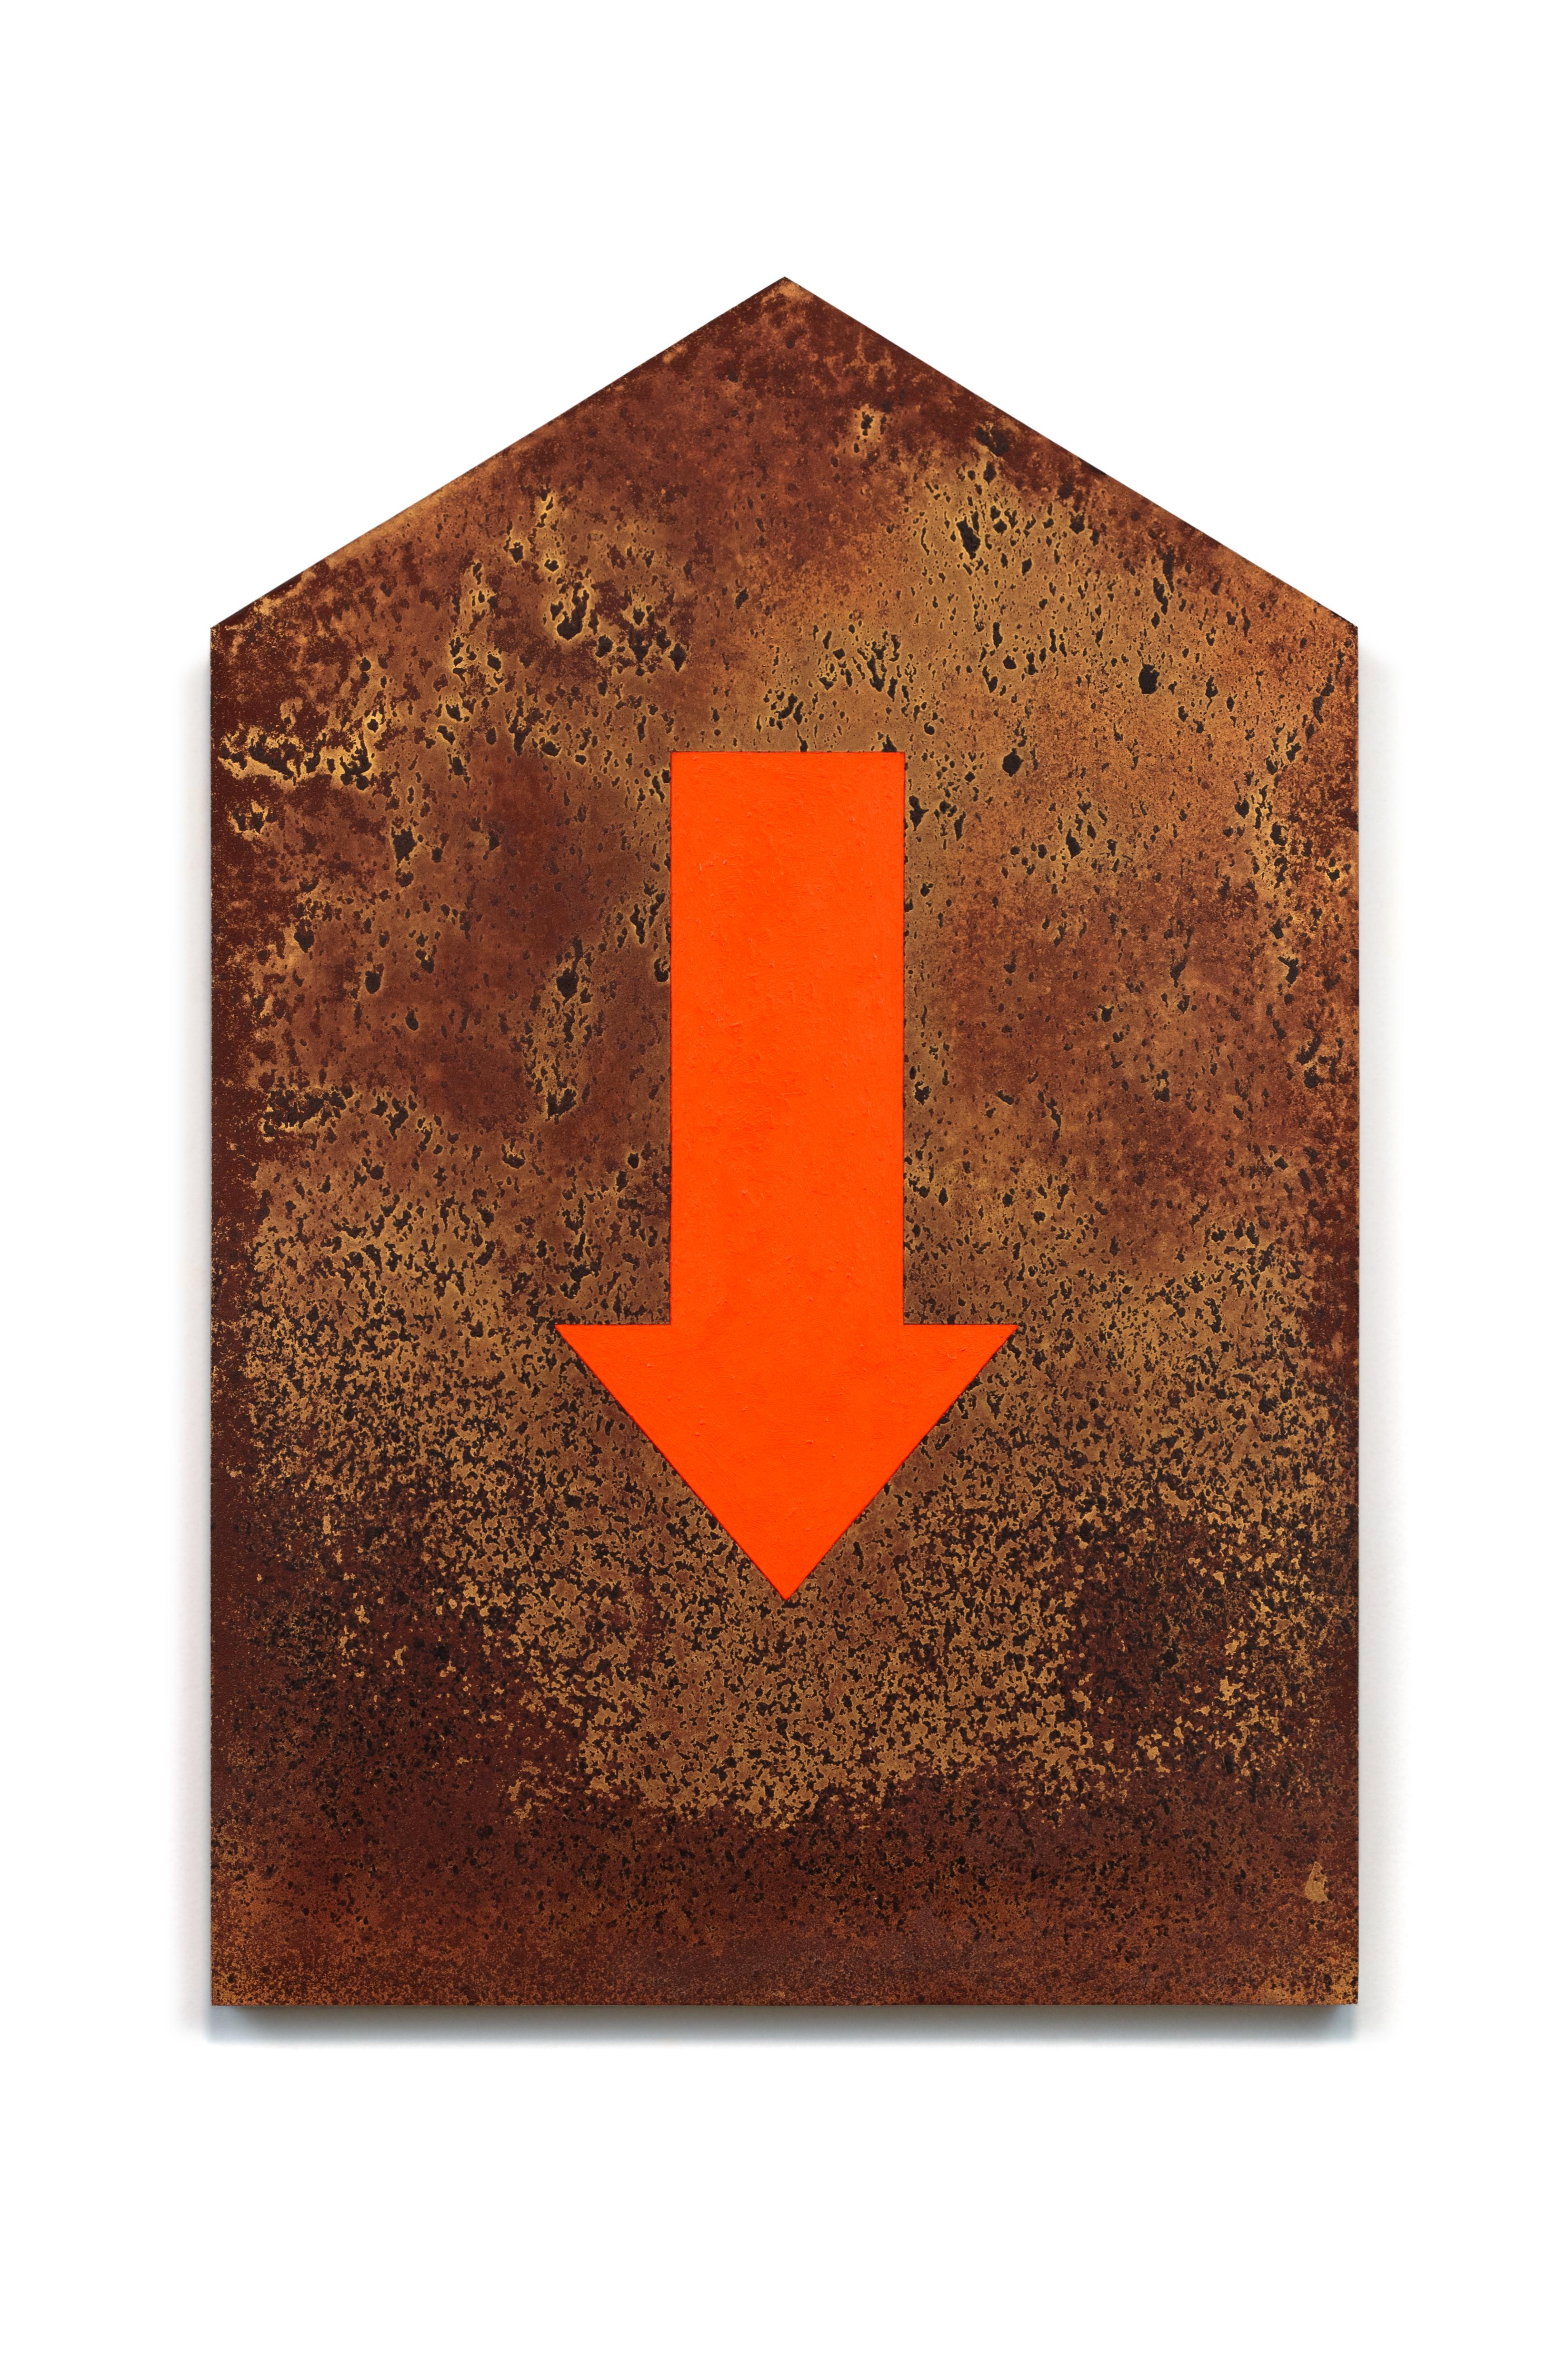 Descent - Hyperrealistic oil painting of rusty directional road sign - Realist Painting by Anthony Adcock